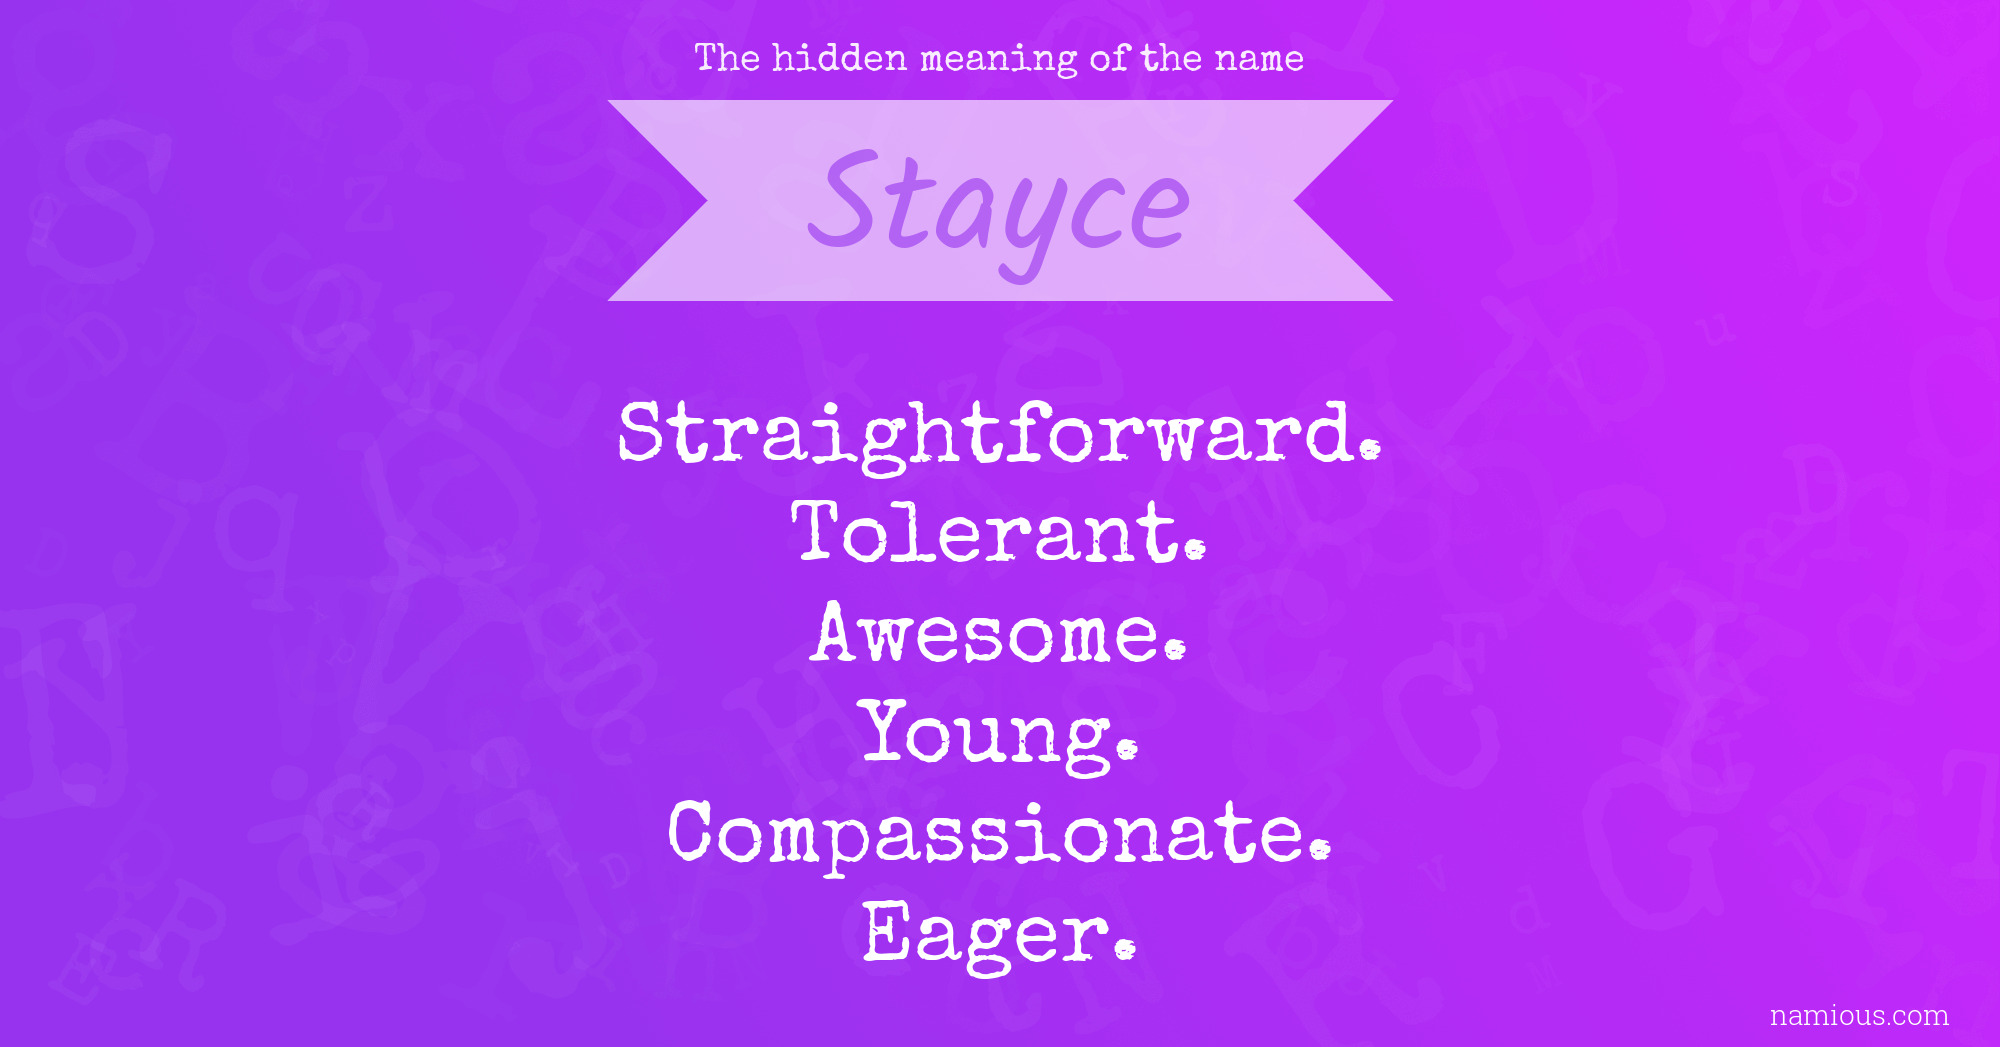 The hidden meaning of the name Stayce